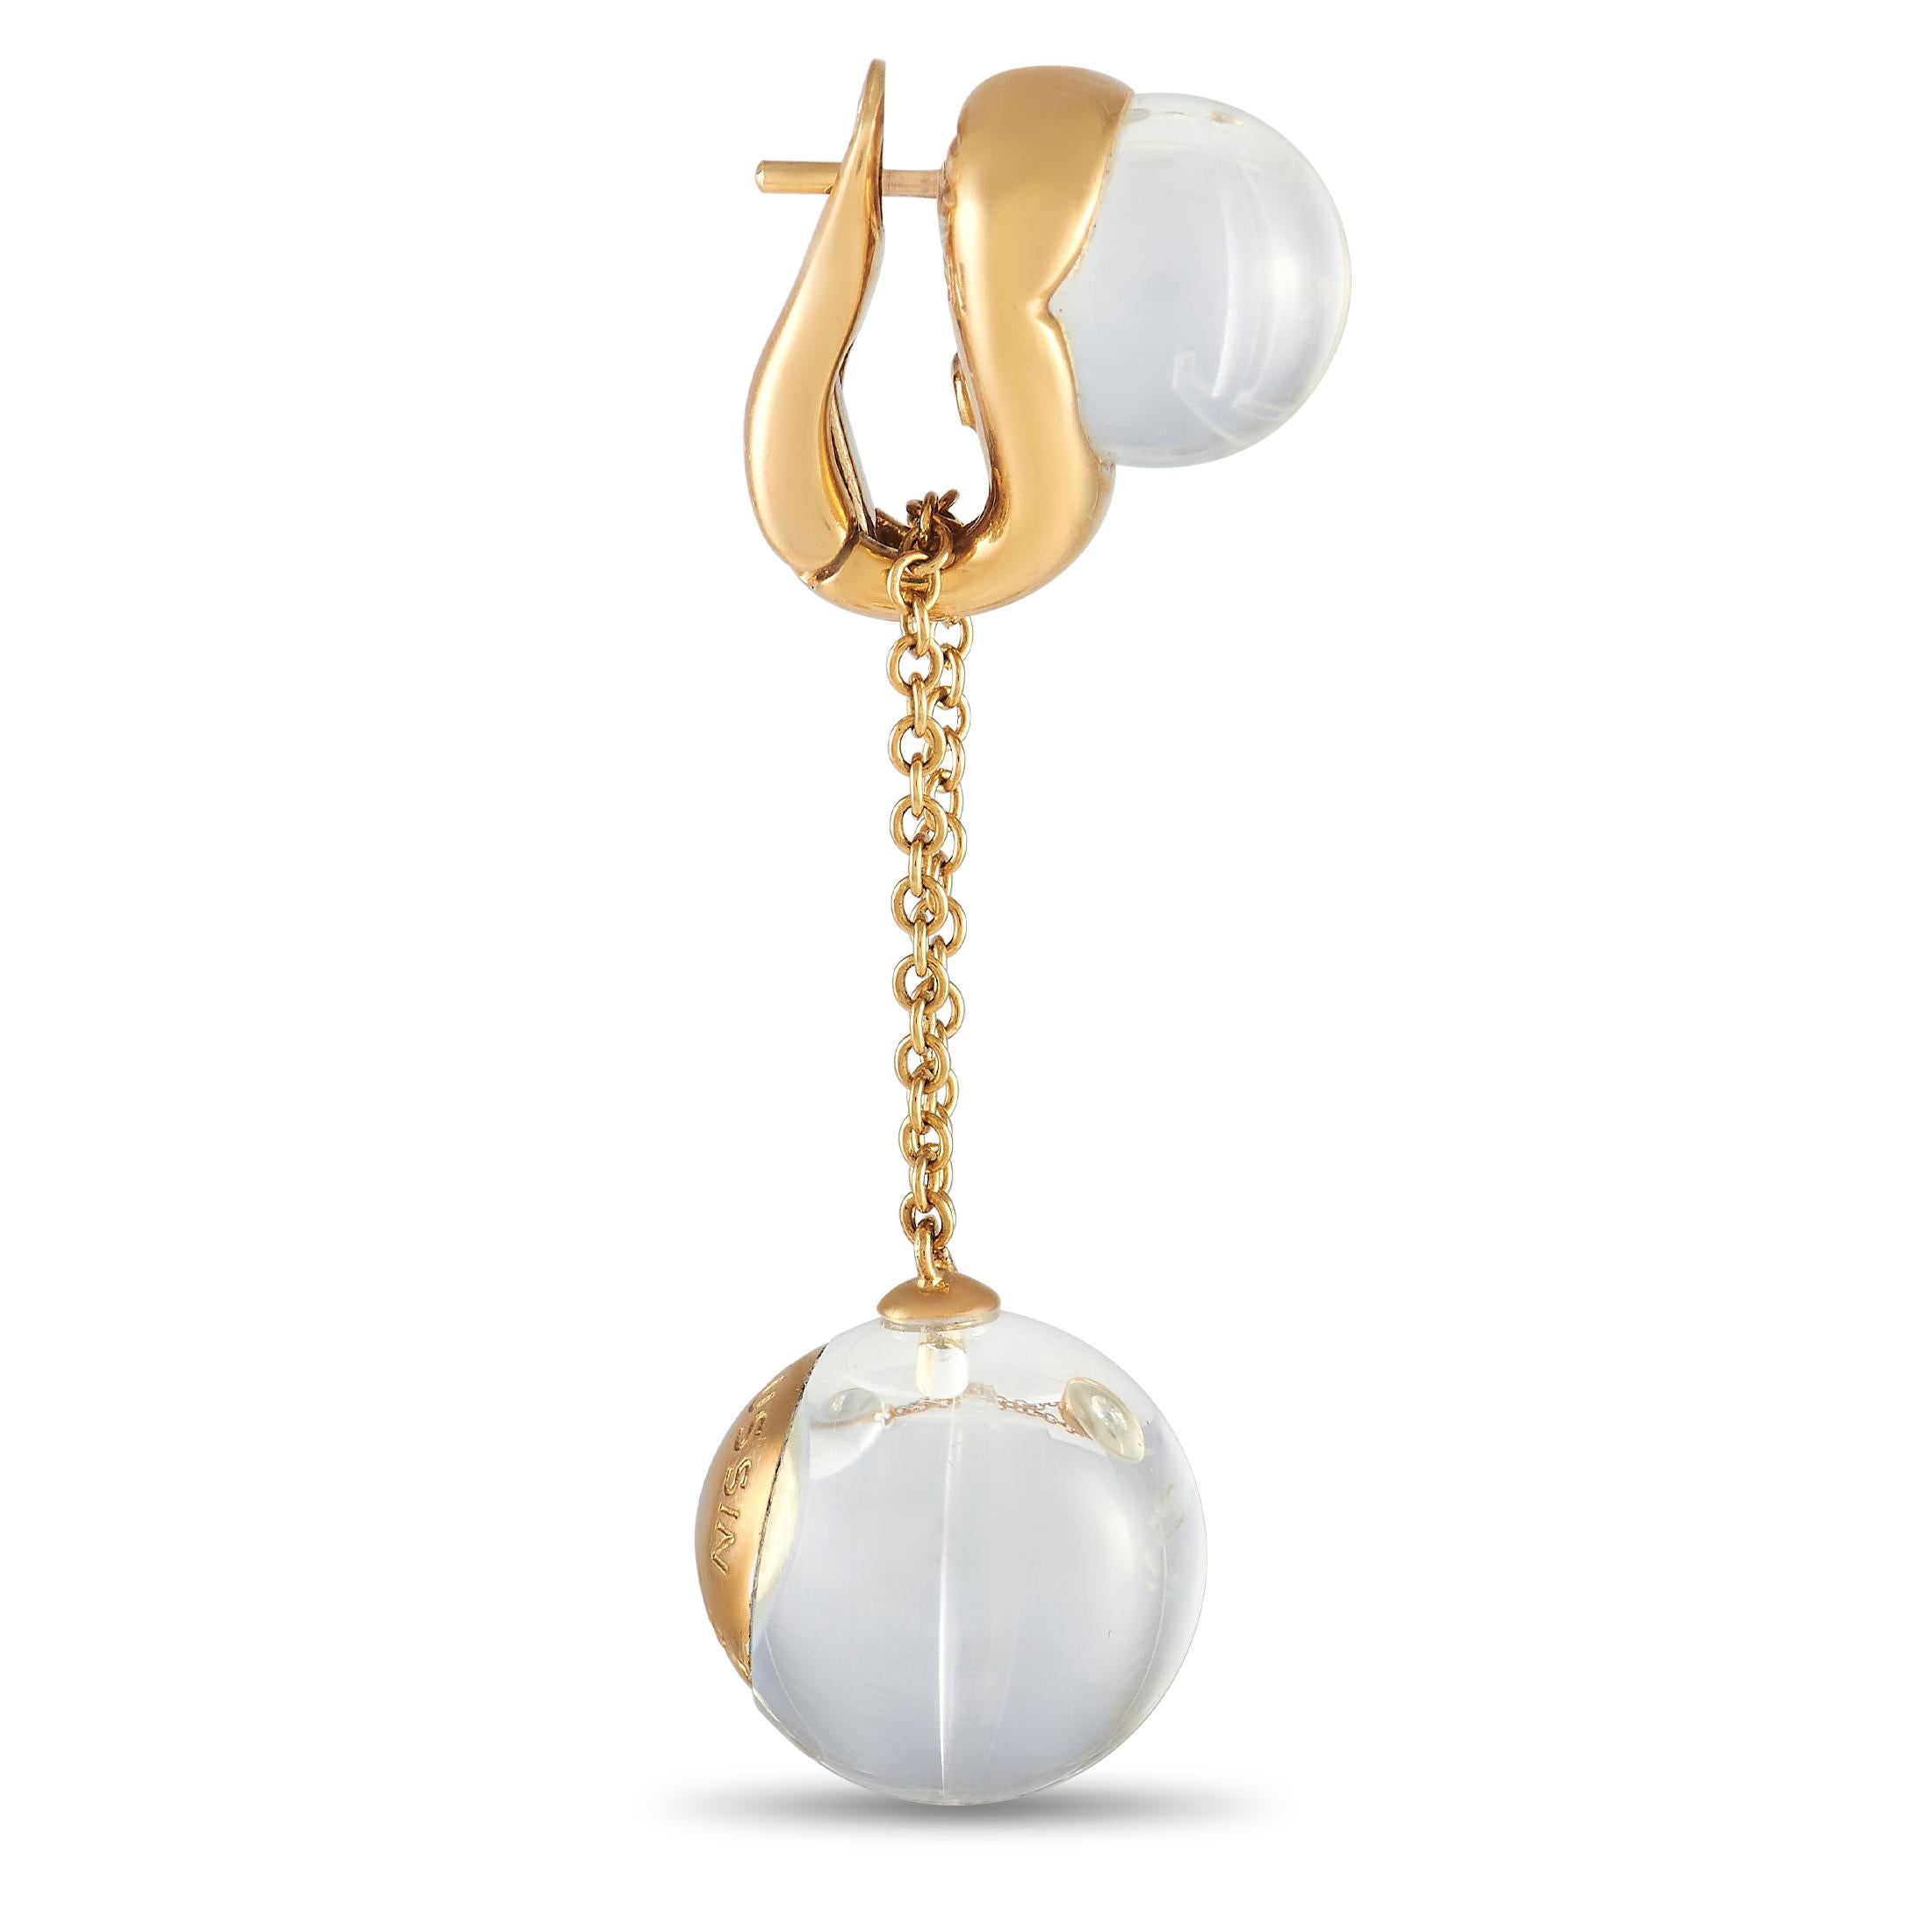 Here is a lovely piece from the jeweler of emotions - Mauboussin. This pair of earrings in 18K yellow gold feature a pear-shaped frame securing a rock crystal stud and a rock crystal drop. Both are dotted with a single diamond for that understated